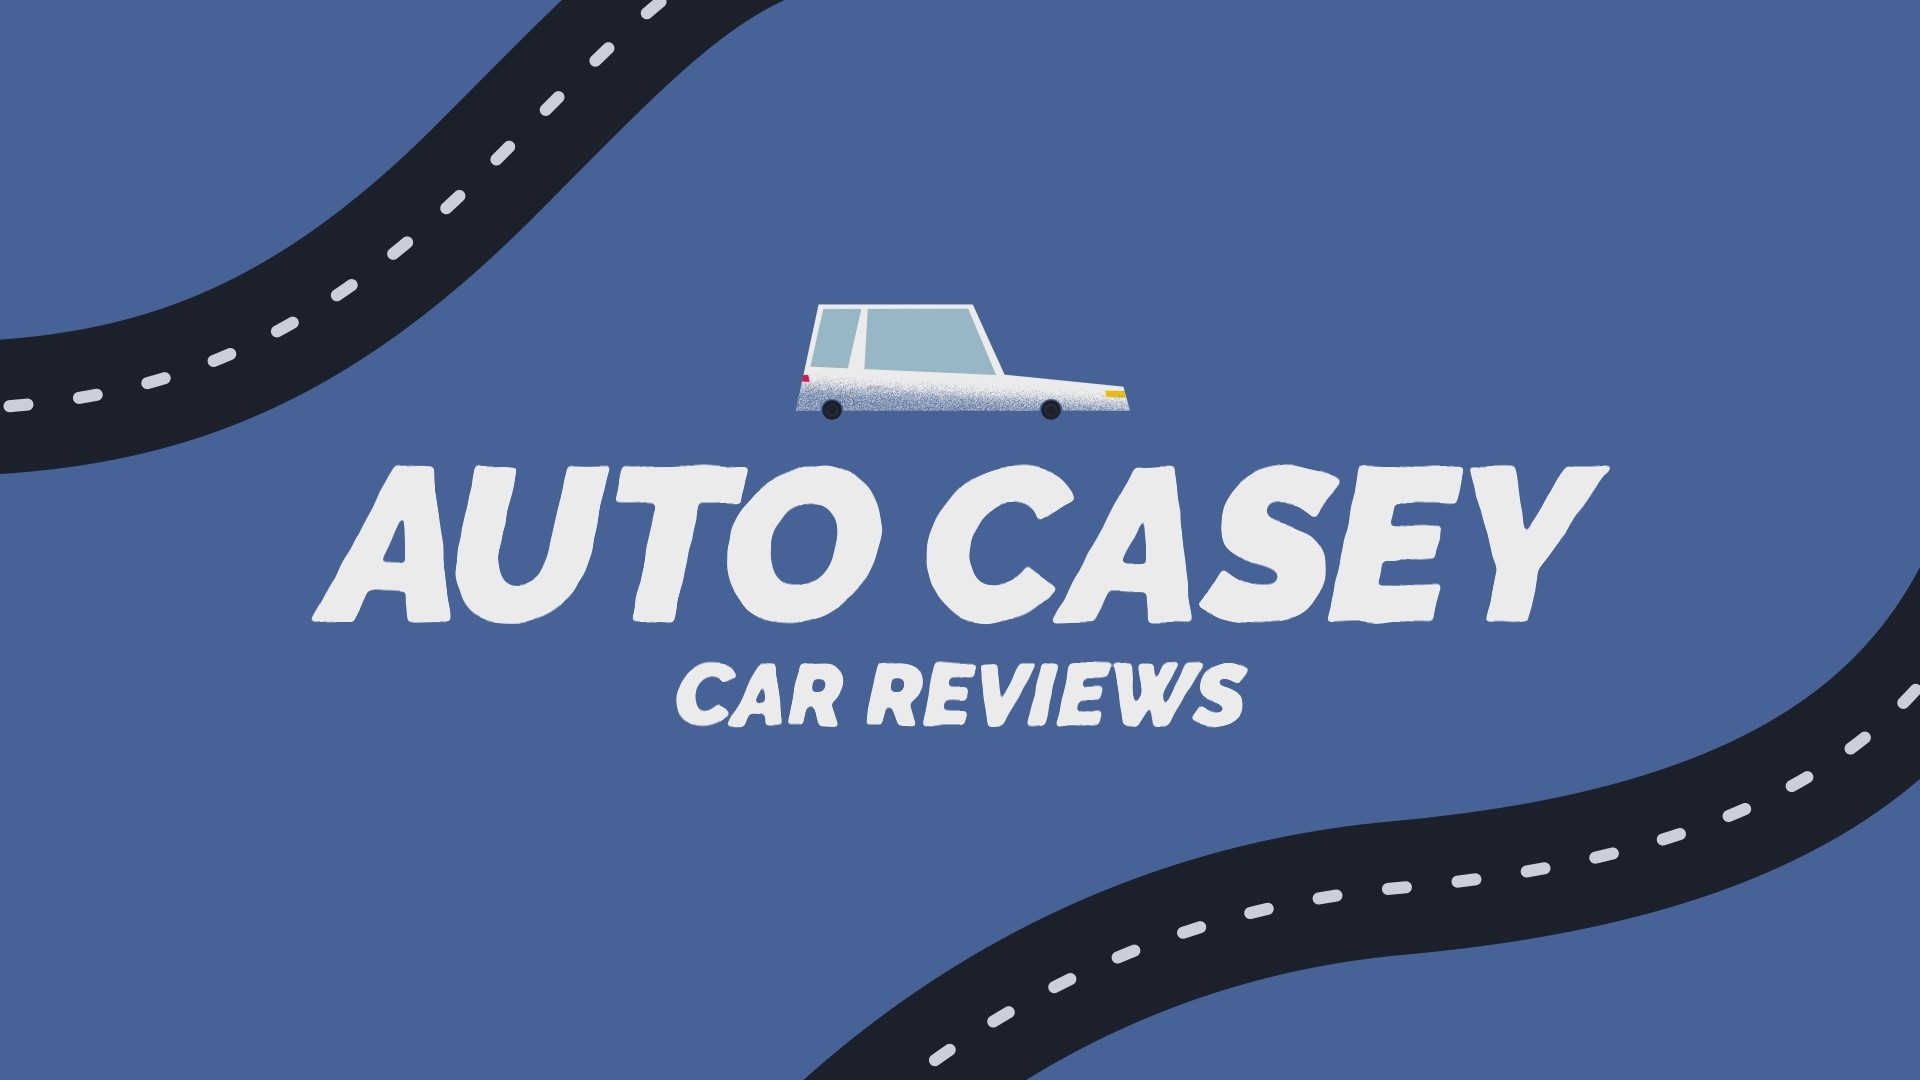 In this episode, Auto Casey gives his complete reviews on the 2024 BMW X5 M60i, 2024 Land Rover Defender 110 S, and the 2024 Ford Maverick Lariat Hybrid.